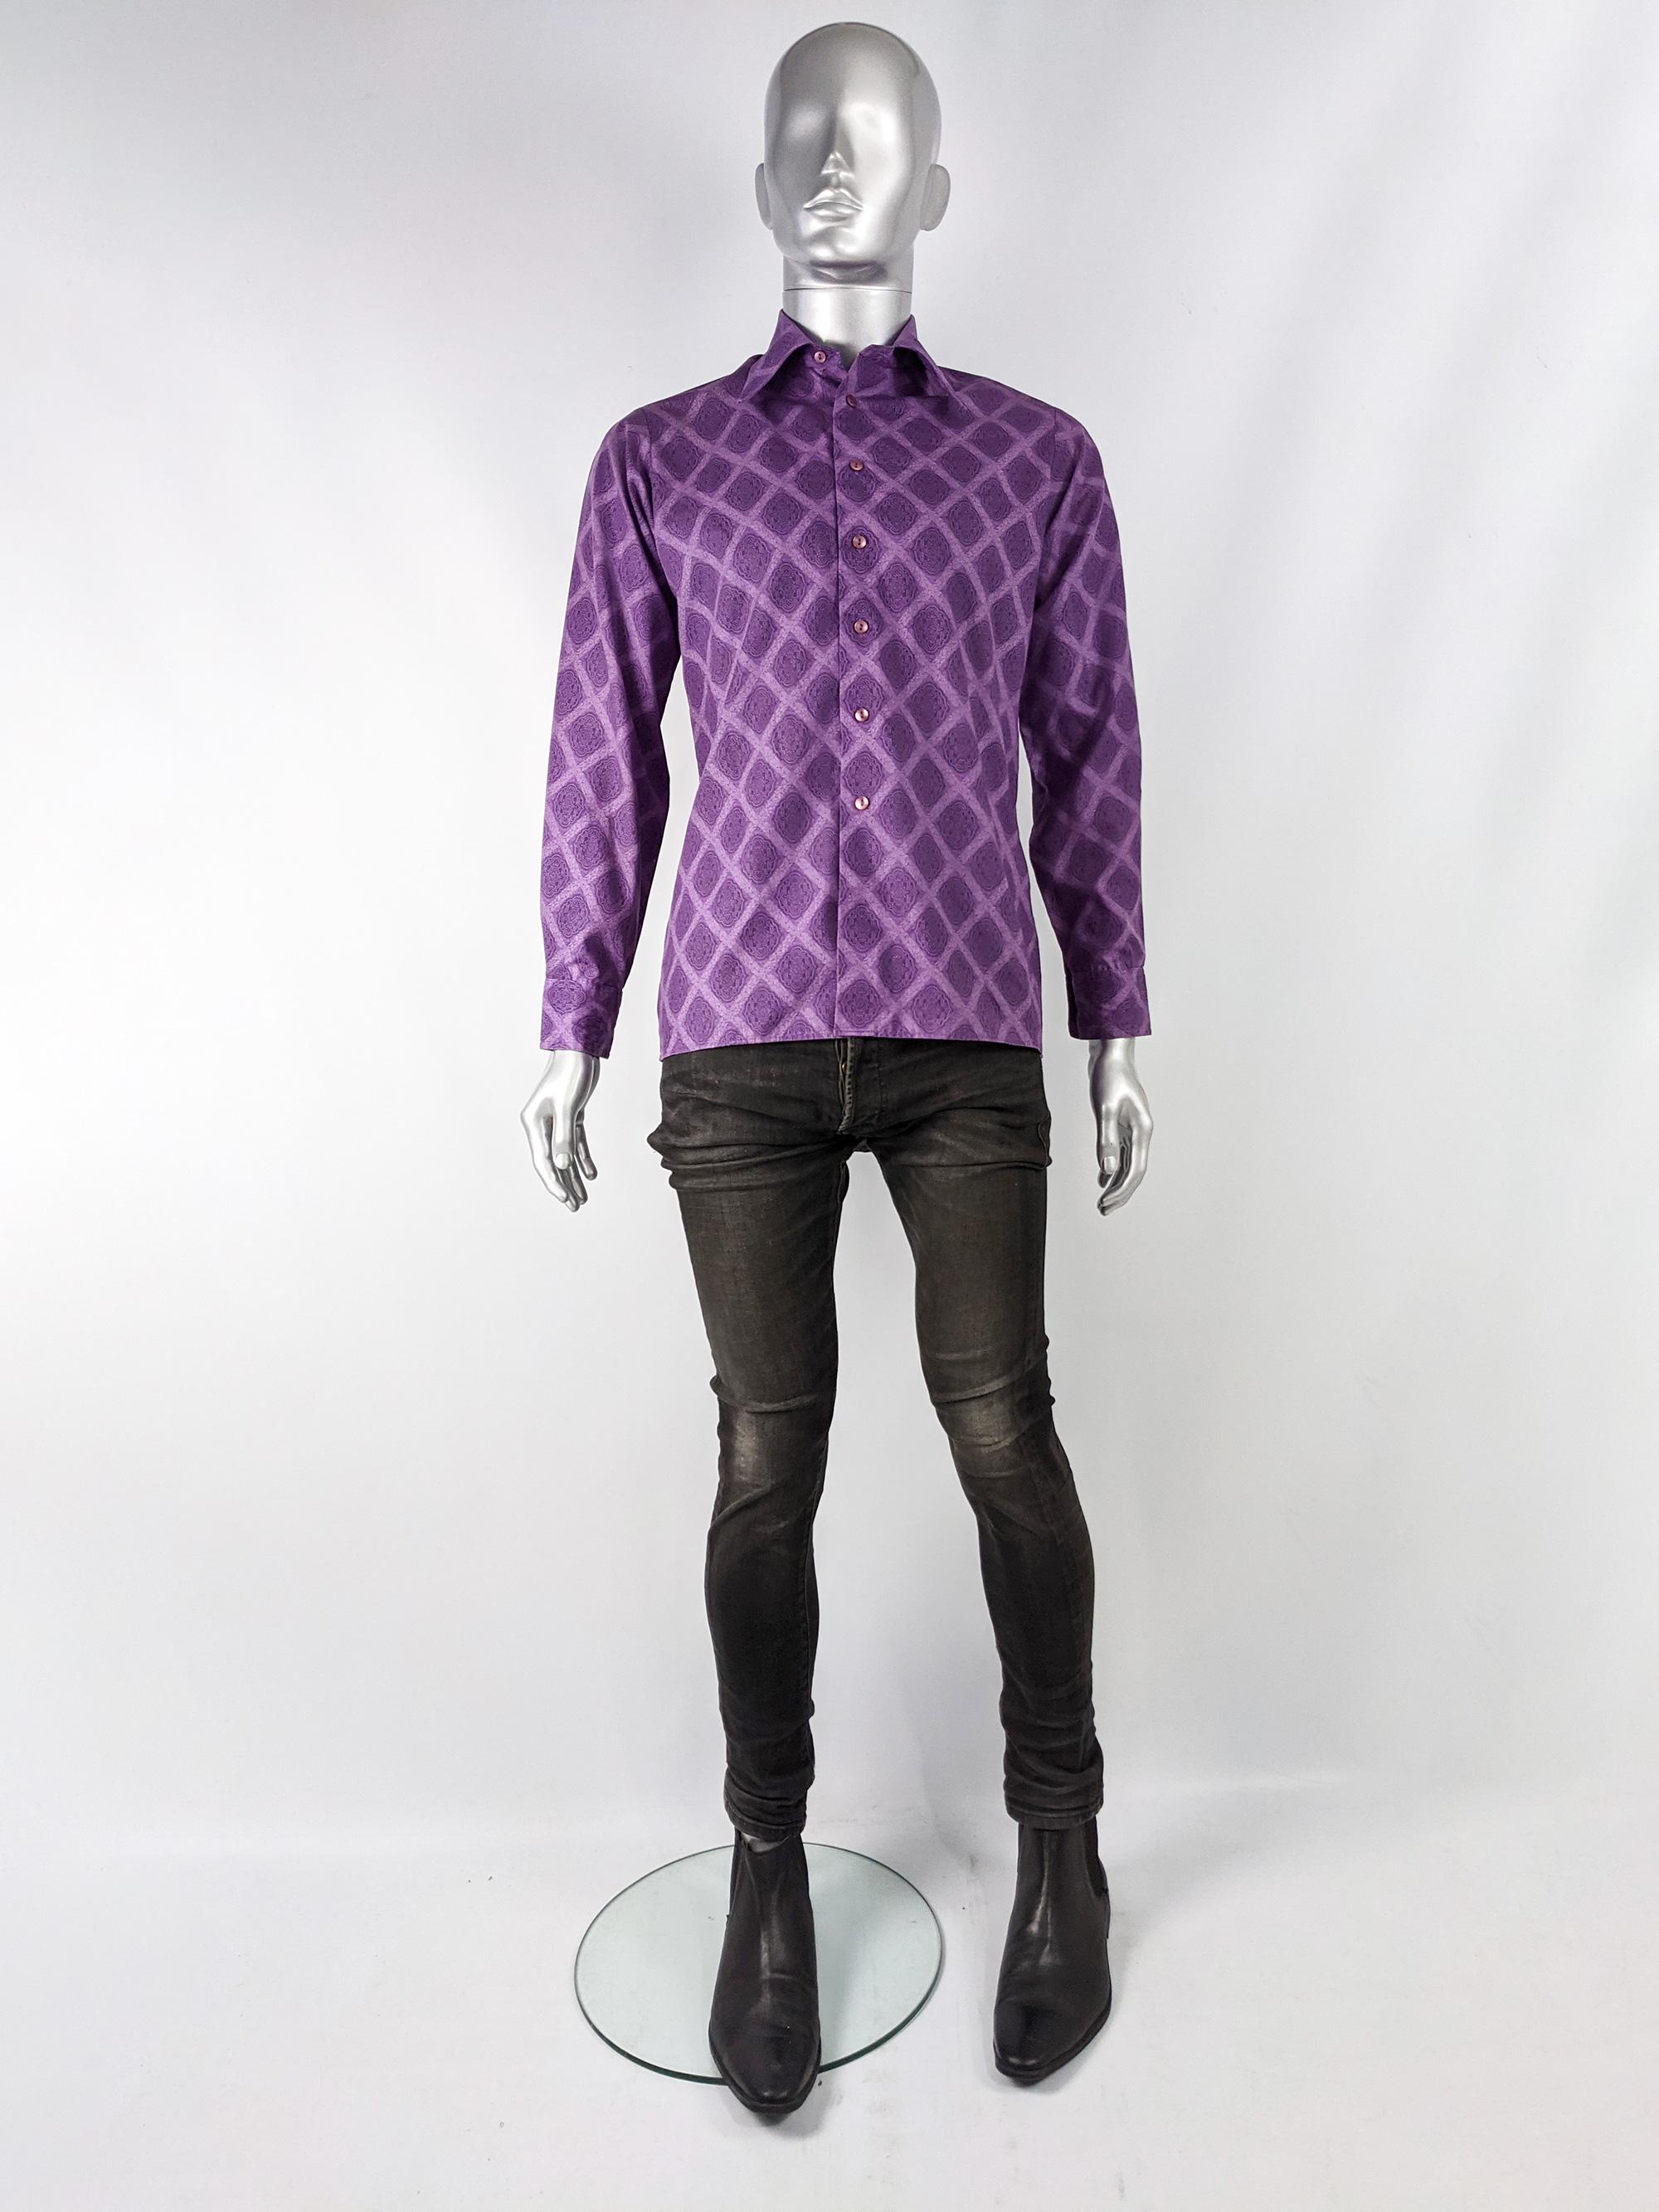 An excellent and rare vintage men's shirt from the 1970s by luxury British label Hornes of London. It is made from a purple poly cotton fabric with an amazing mod style arabesque print throughout. It has long sleeves, a slim fit and a typical 1970s